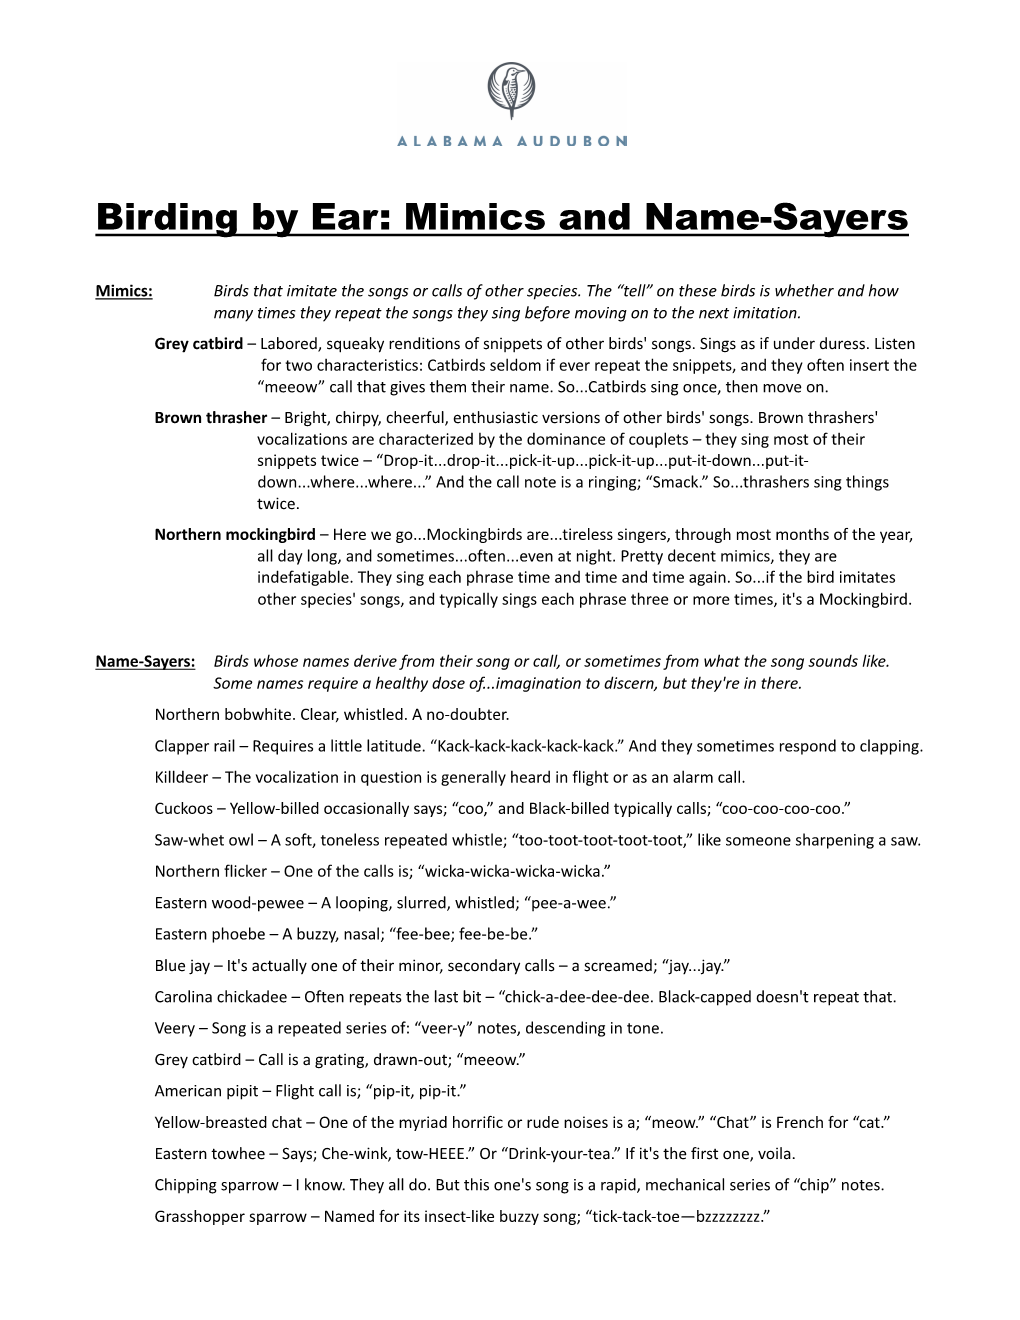 Birding by Ear: Mimics and Name-Sayers